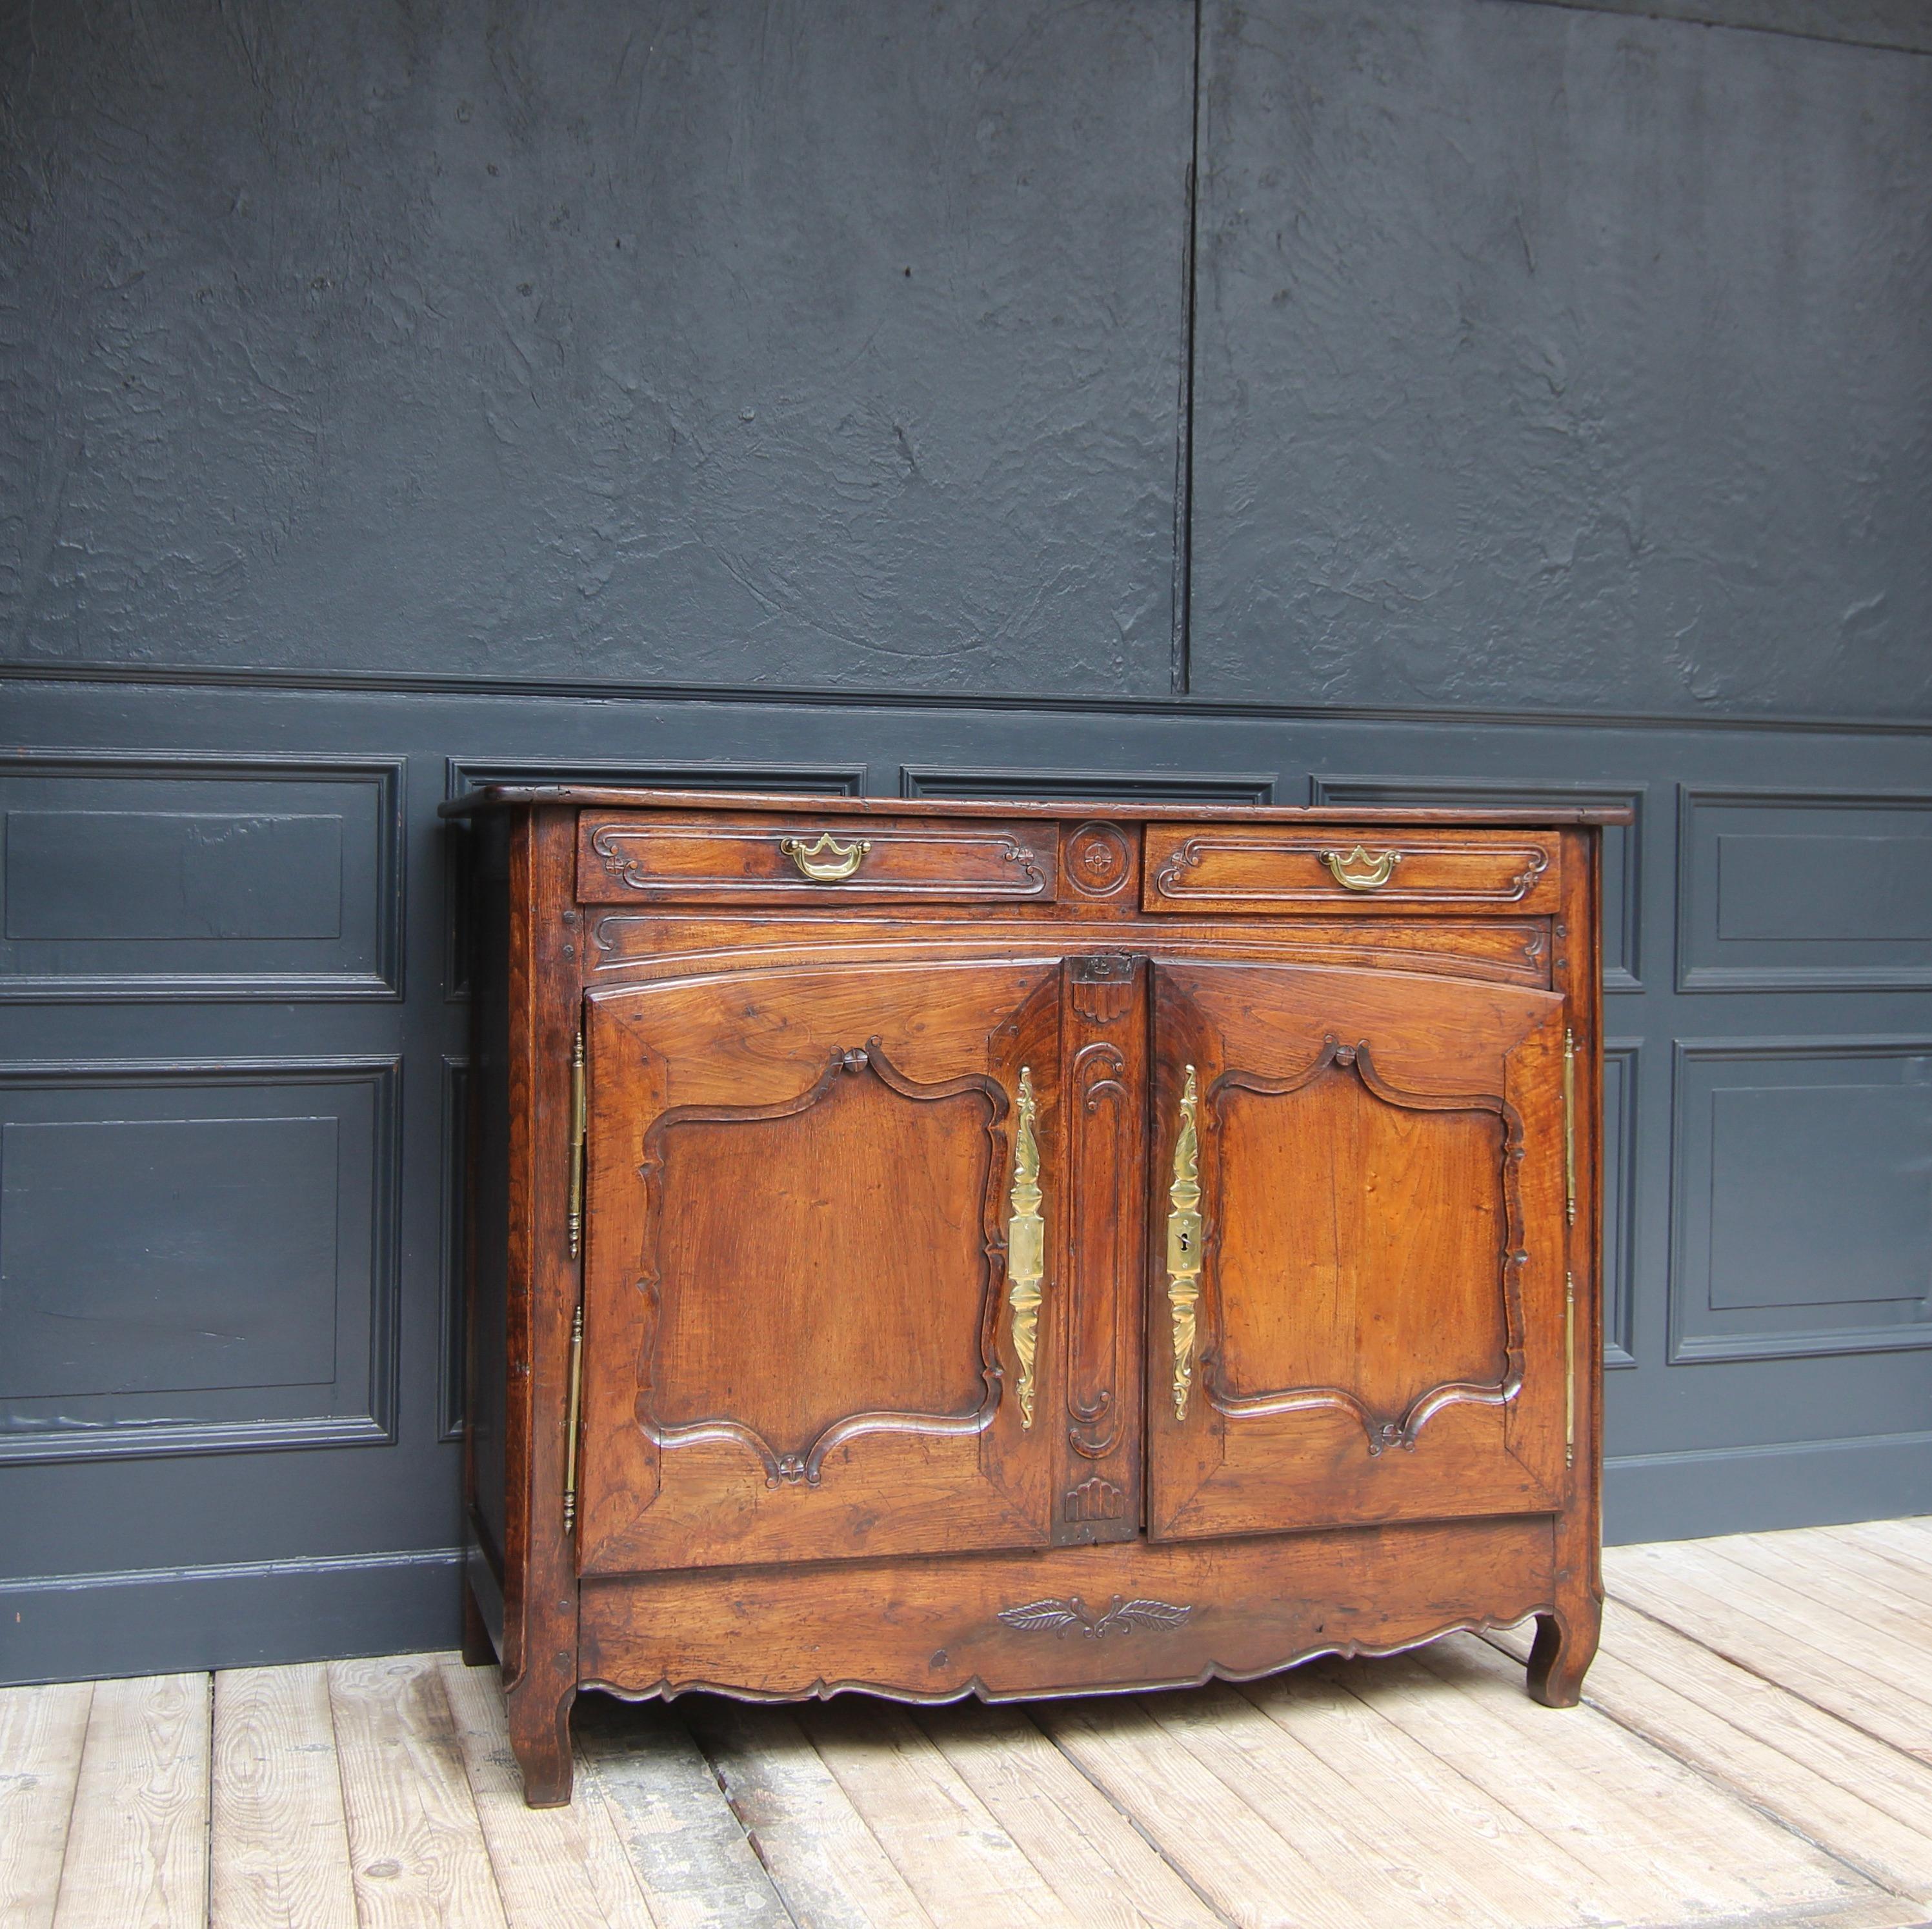 A French provincial sideboard from the late 18th century. Made of solid oak wood with beautiful, warm patina.

Partially ornamentally carved oak body, panelled on the sides, and with 2 drawers under a slightly protruding top panel. Bevelled corners